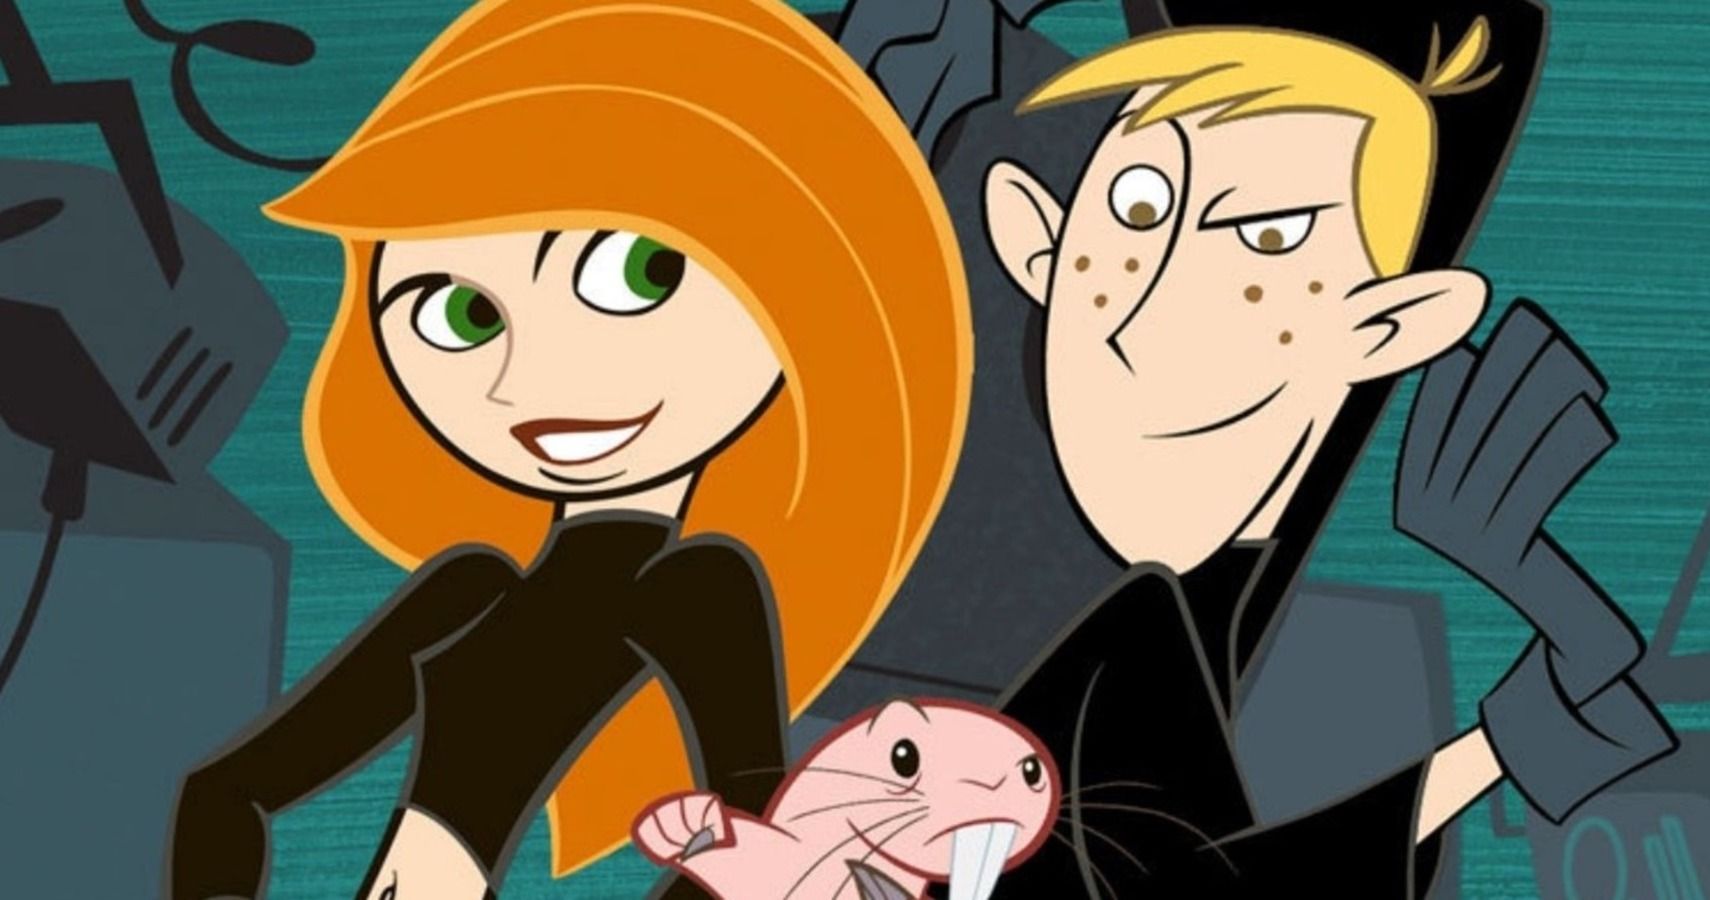 The 10 Best Episodes Of Kim Possible According To Imdb